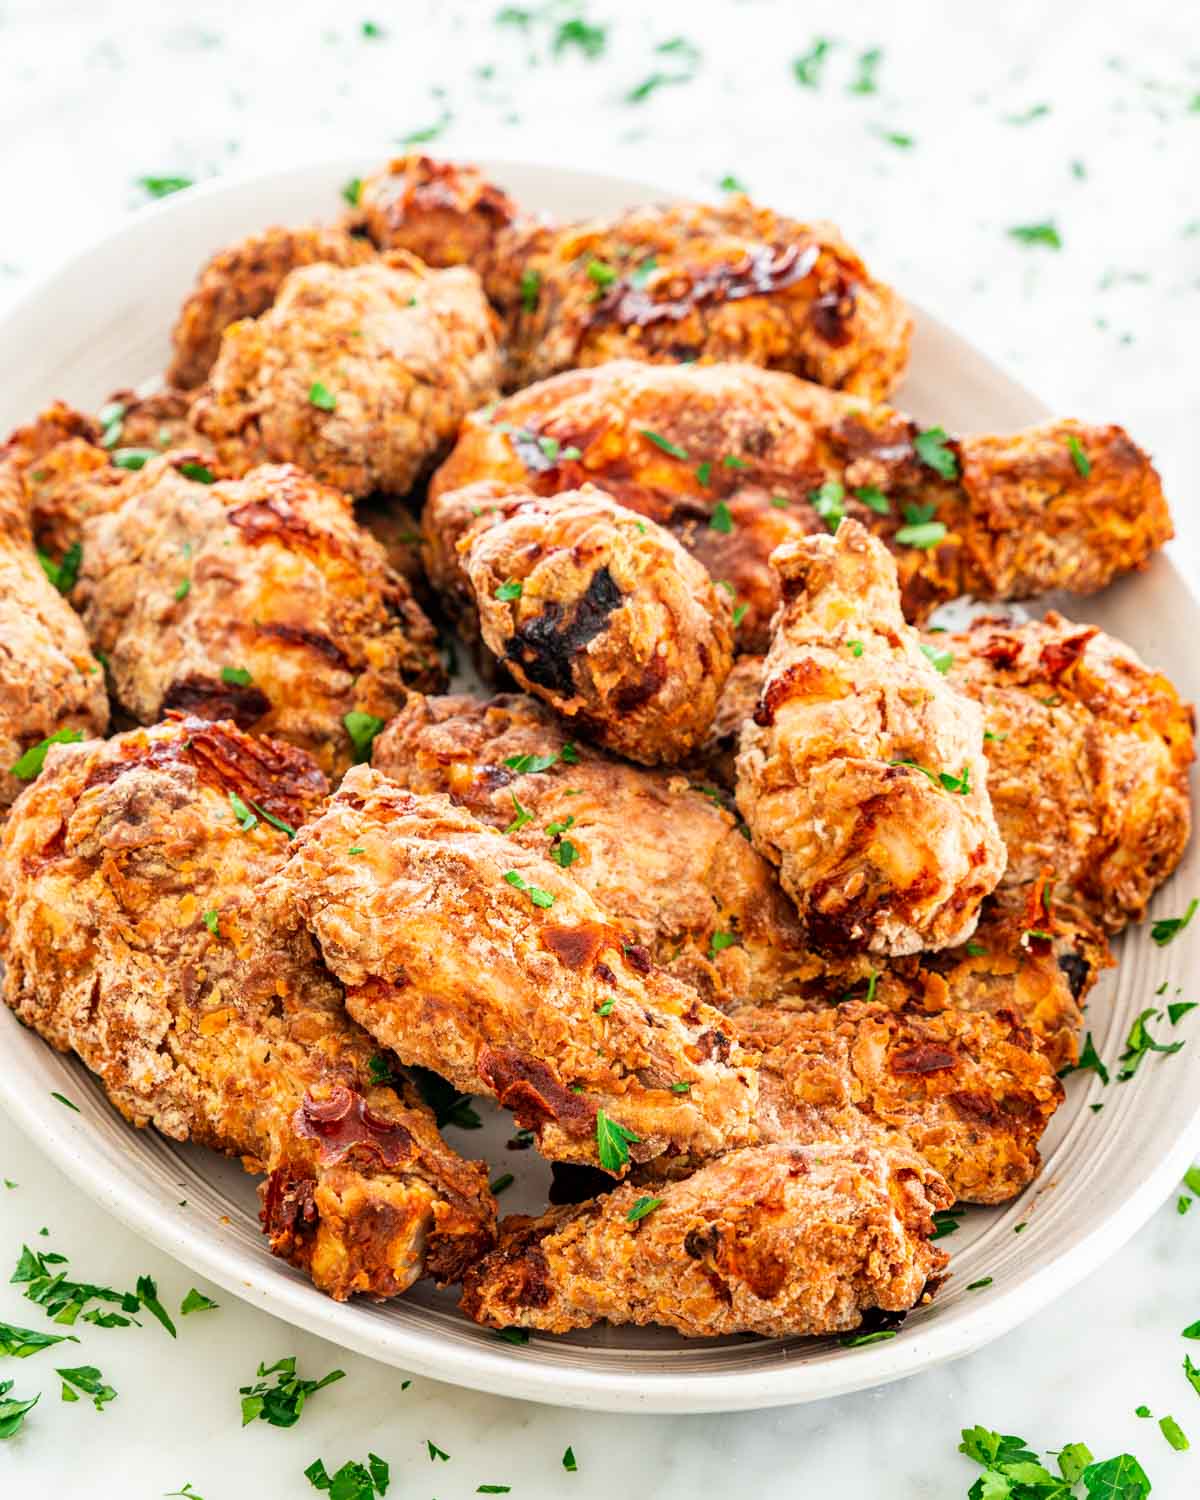 fried chicken on a serving platter garnished with parsley